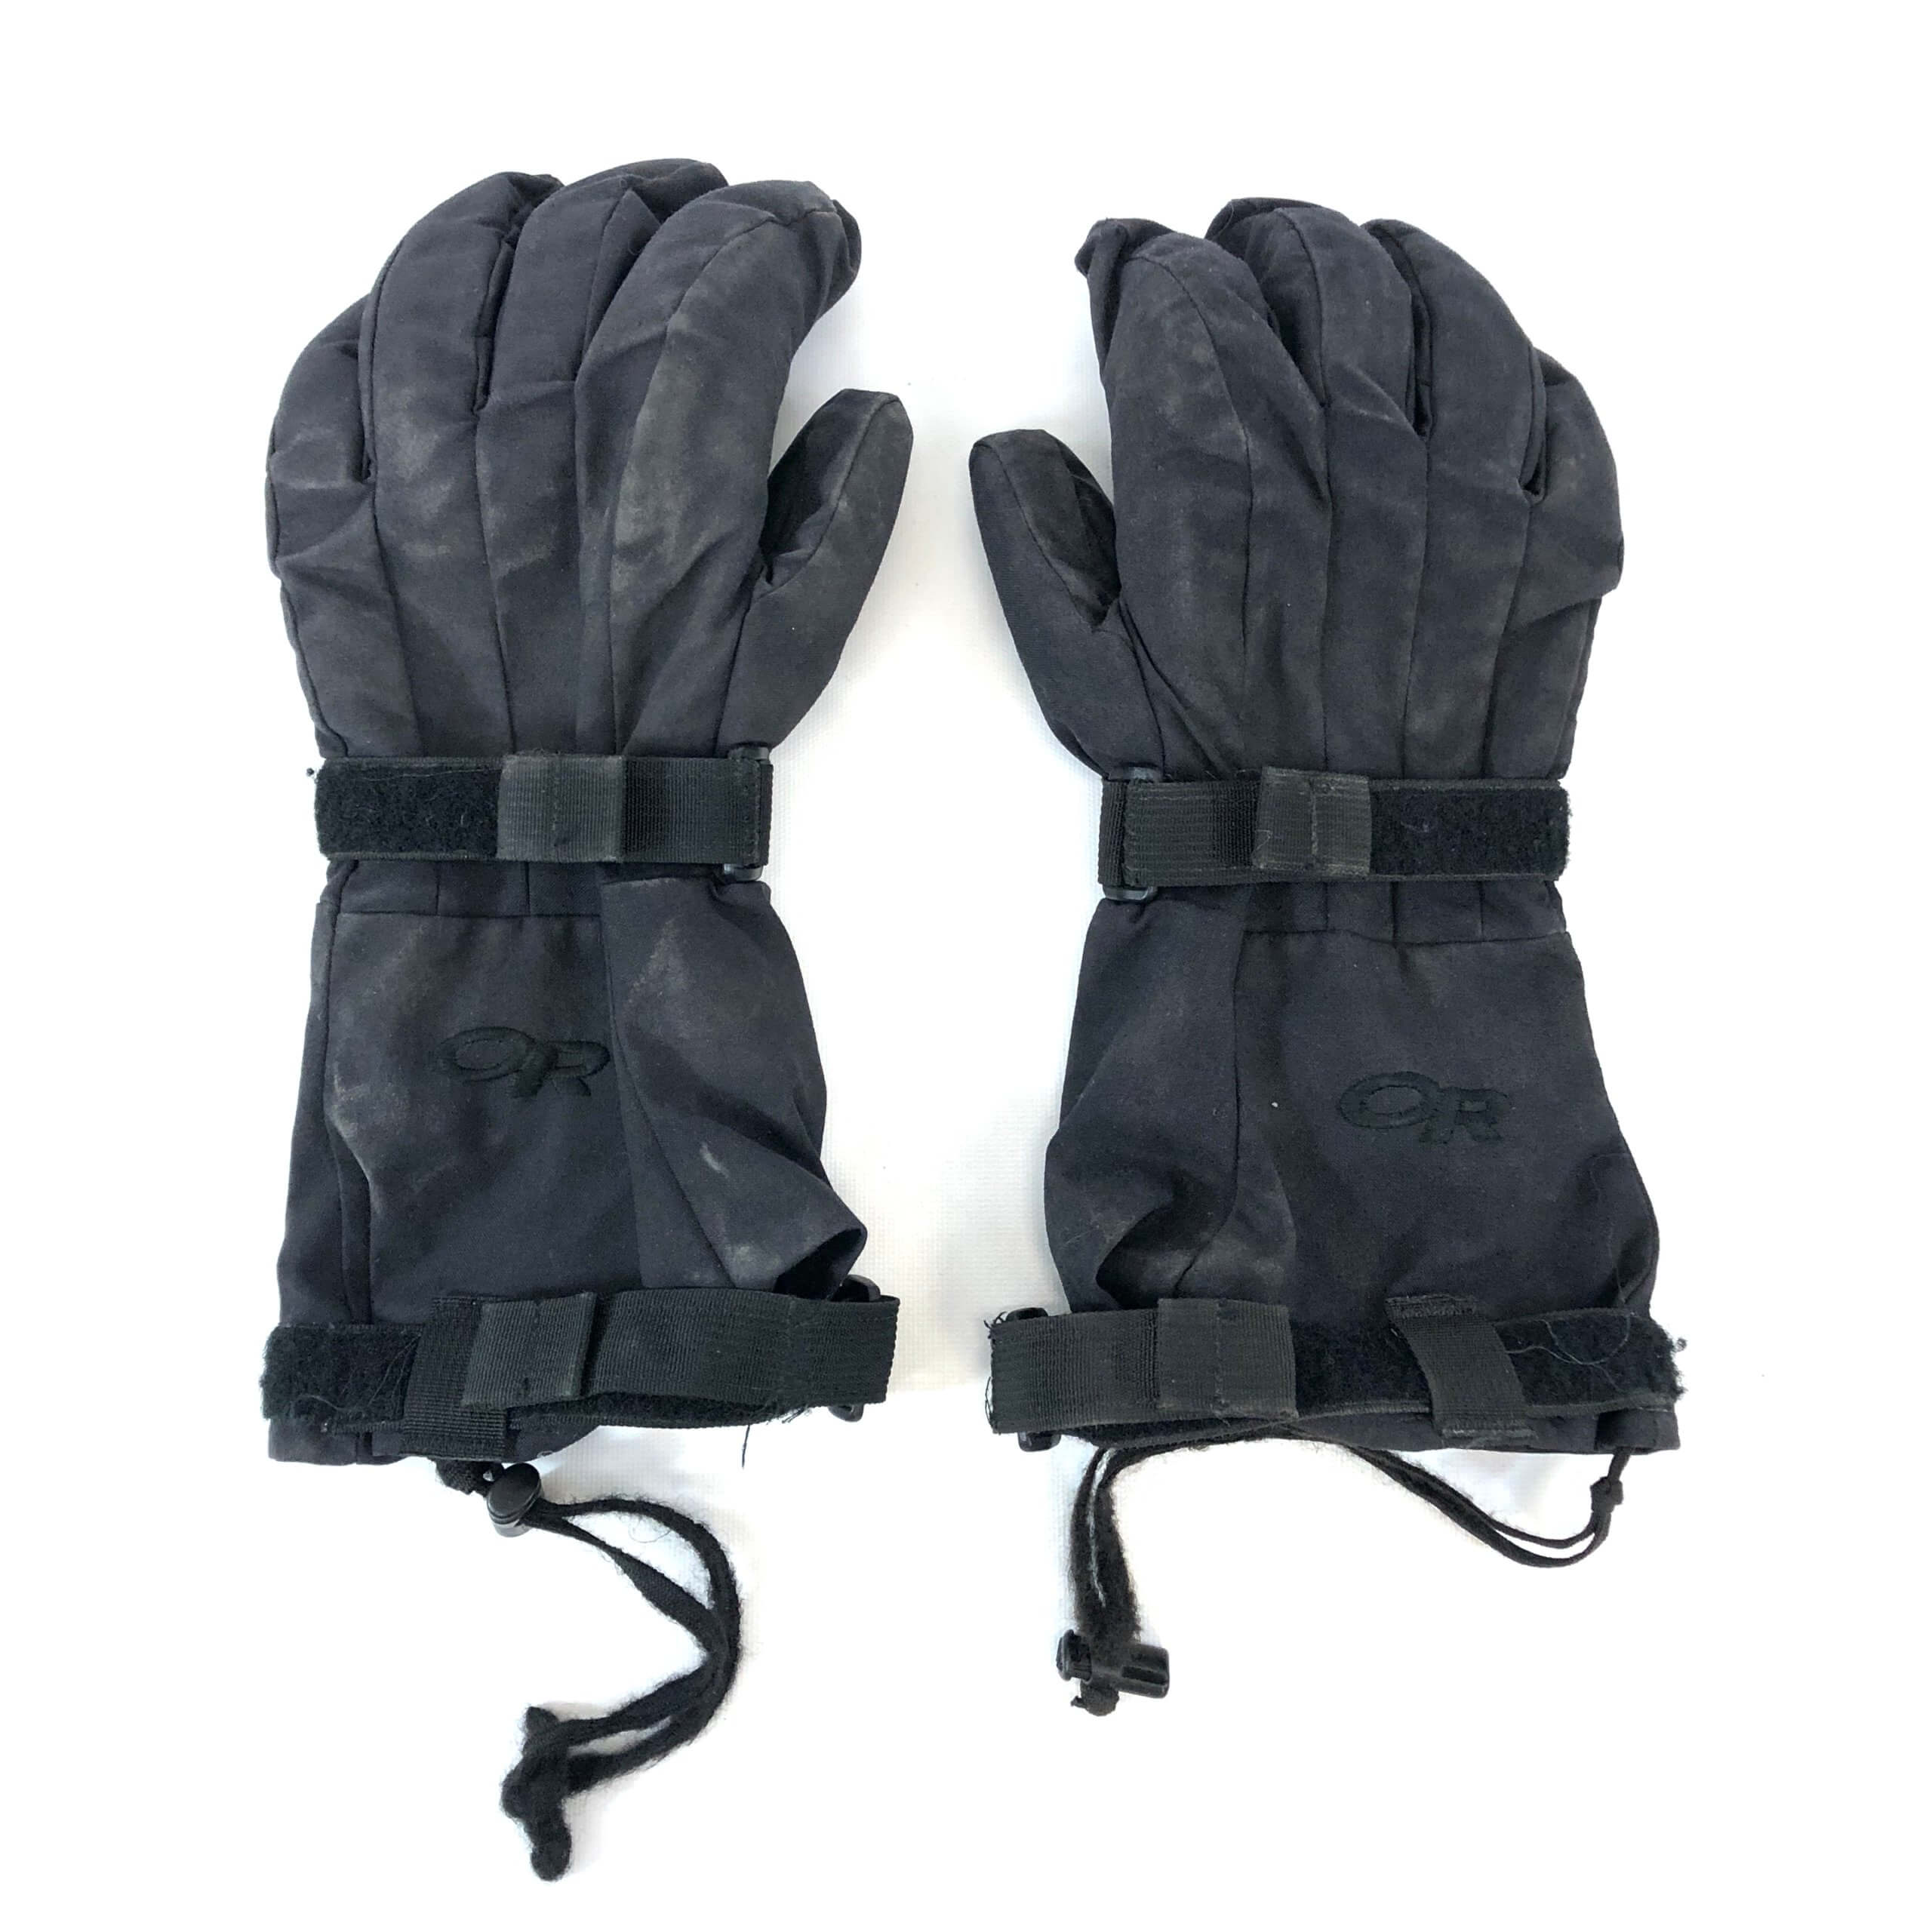 Brand New Outdoor Research Military Black Pro Mod Gloves with Liner XL USGI 